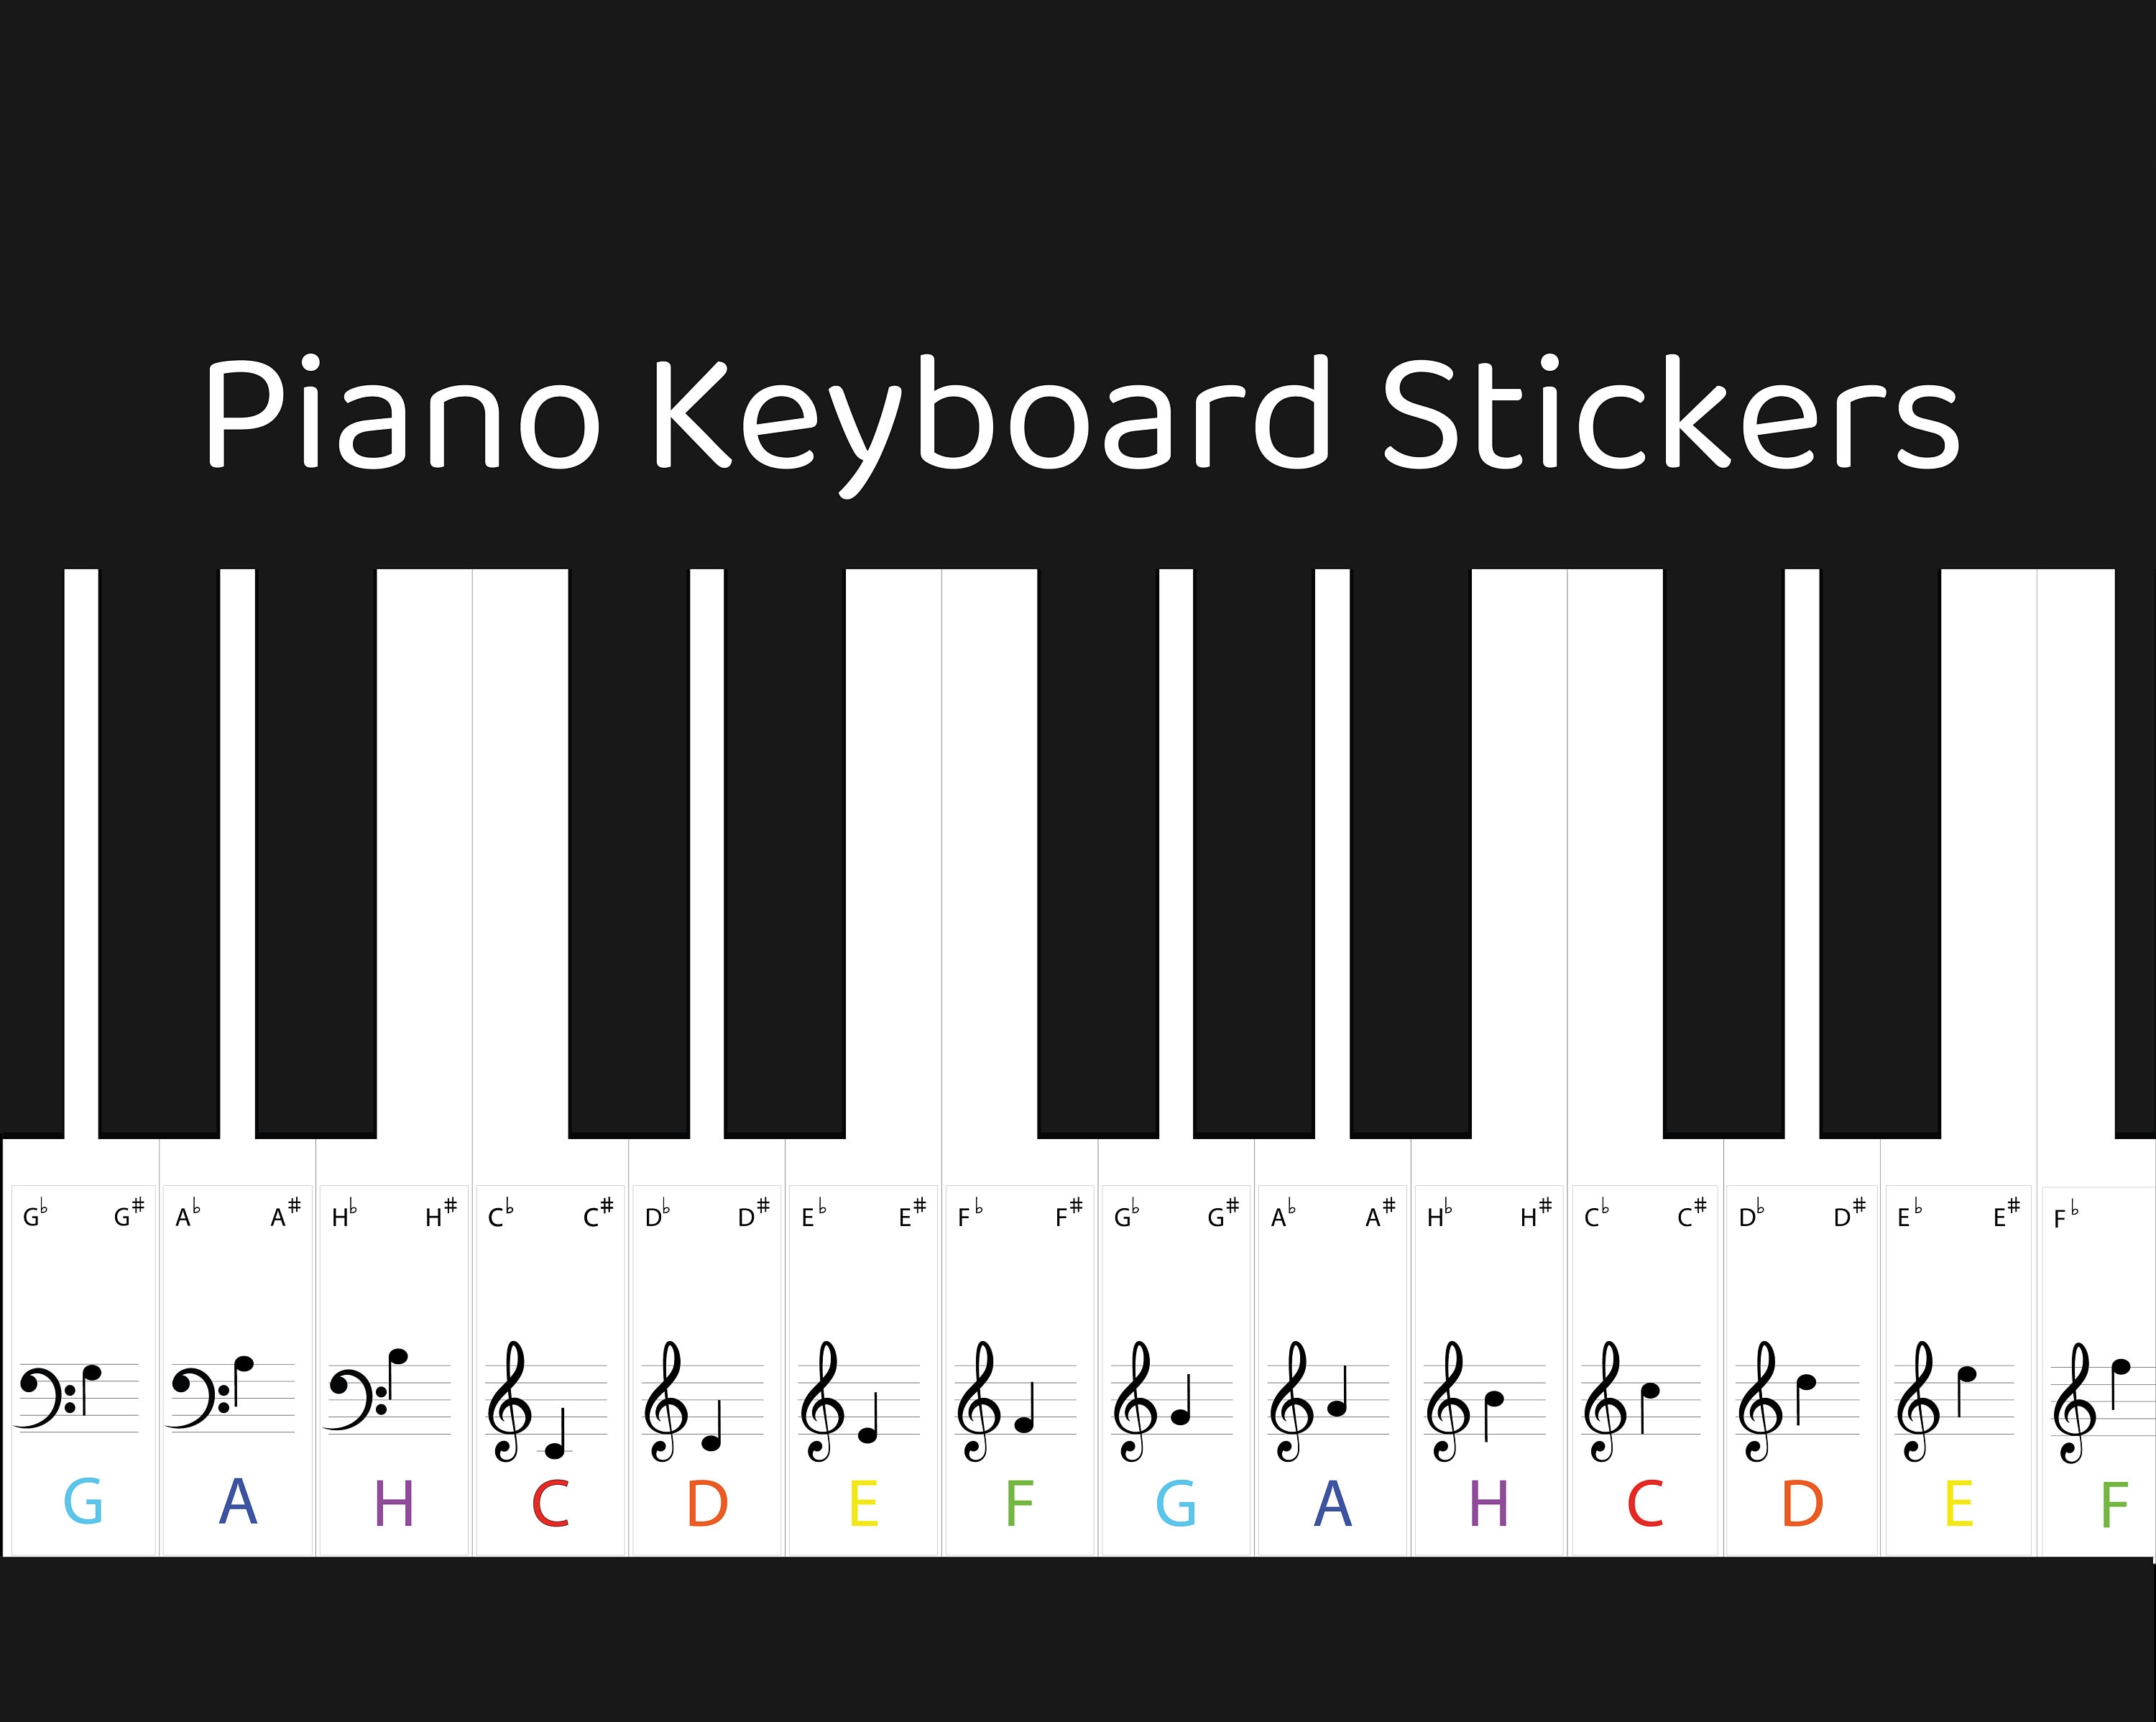 Silicone Piano Note Stickers,Learn to Play Piano,Overlay Removable